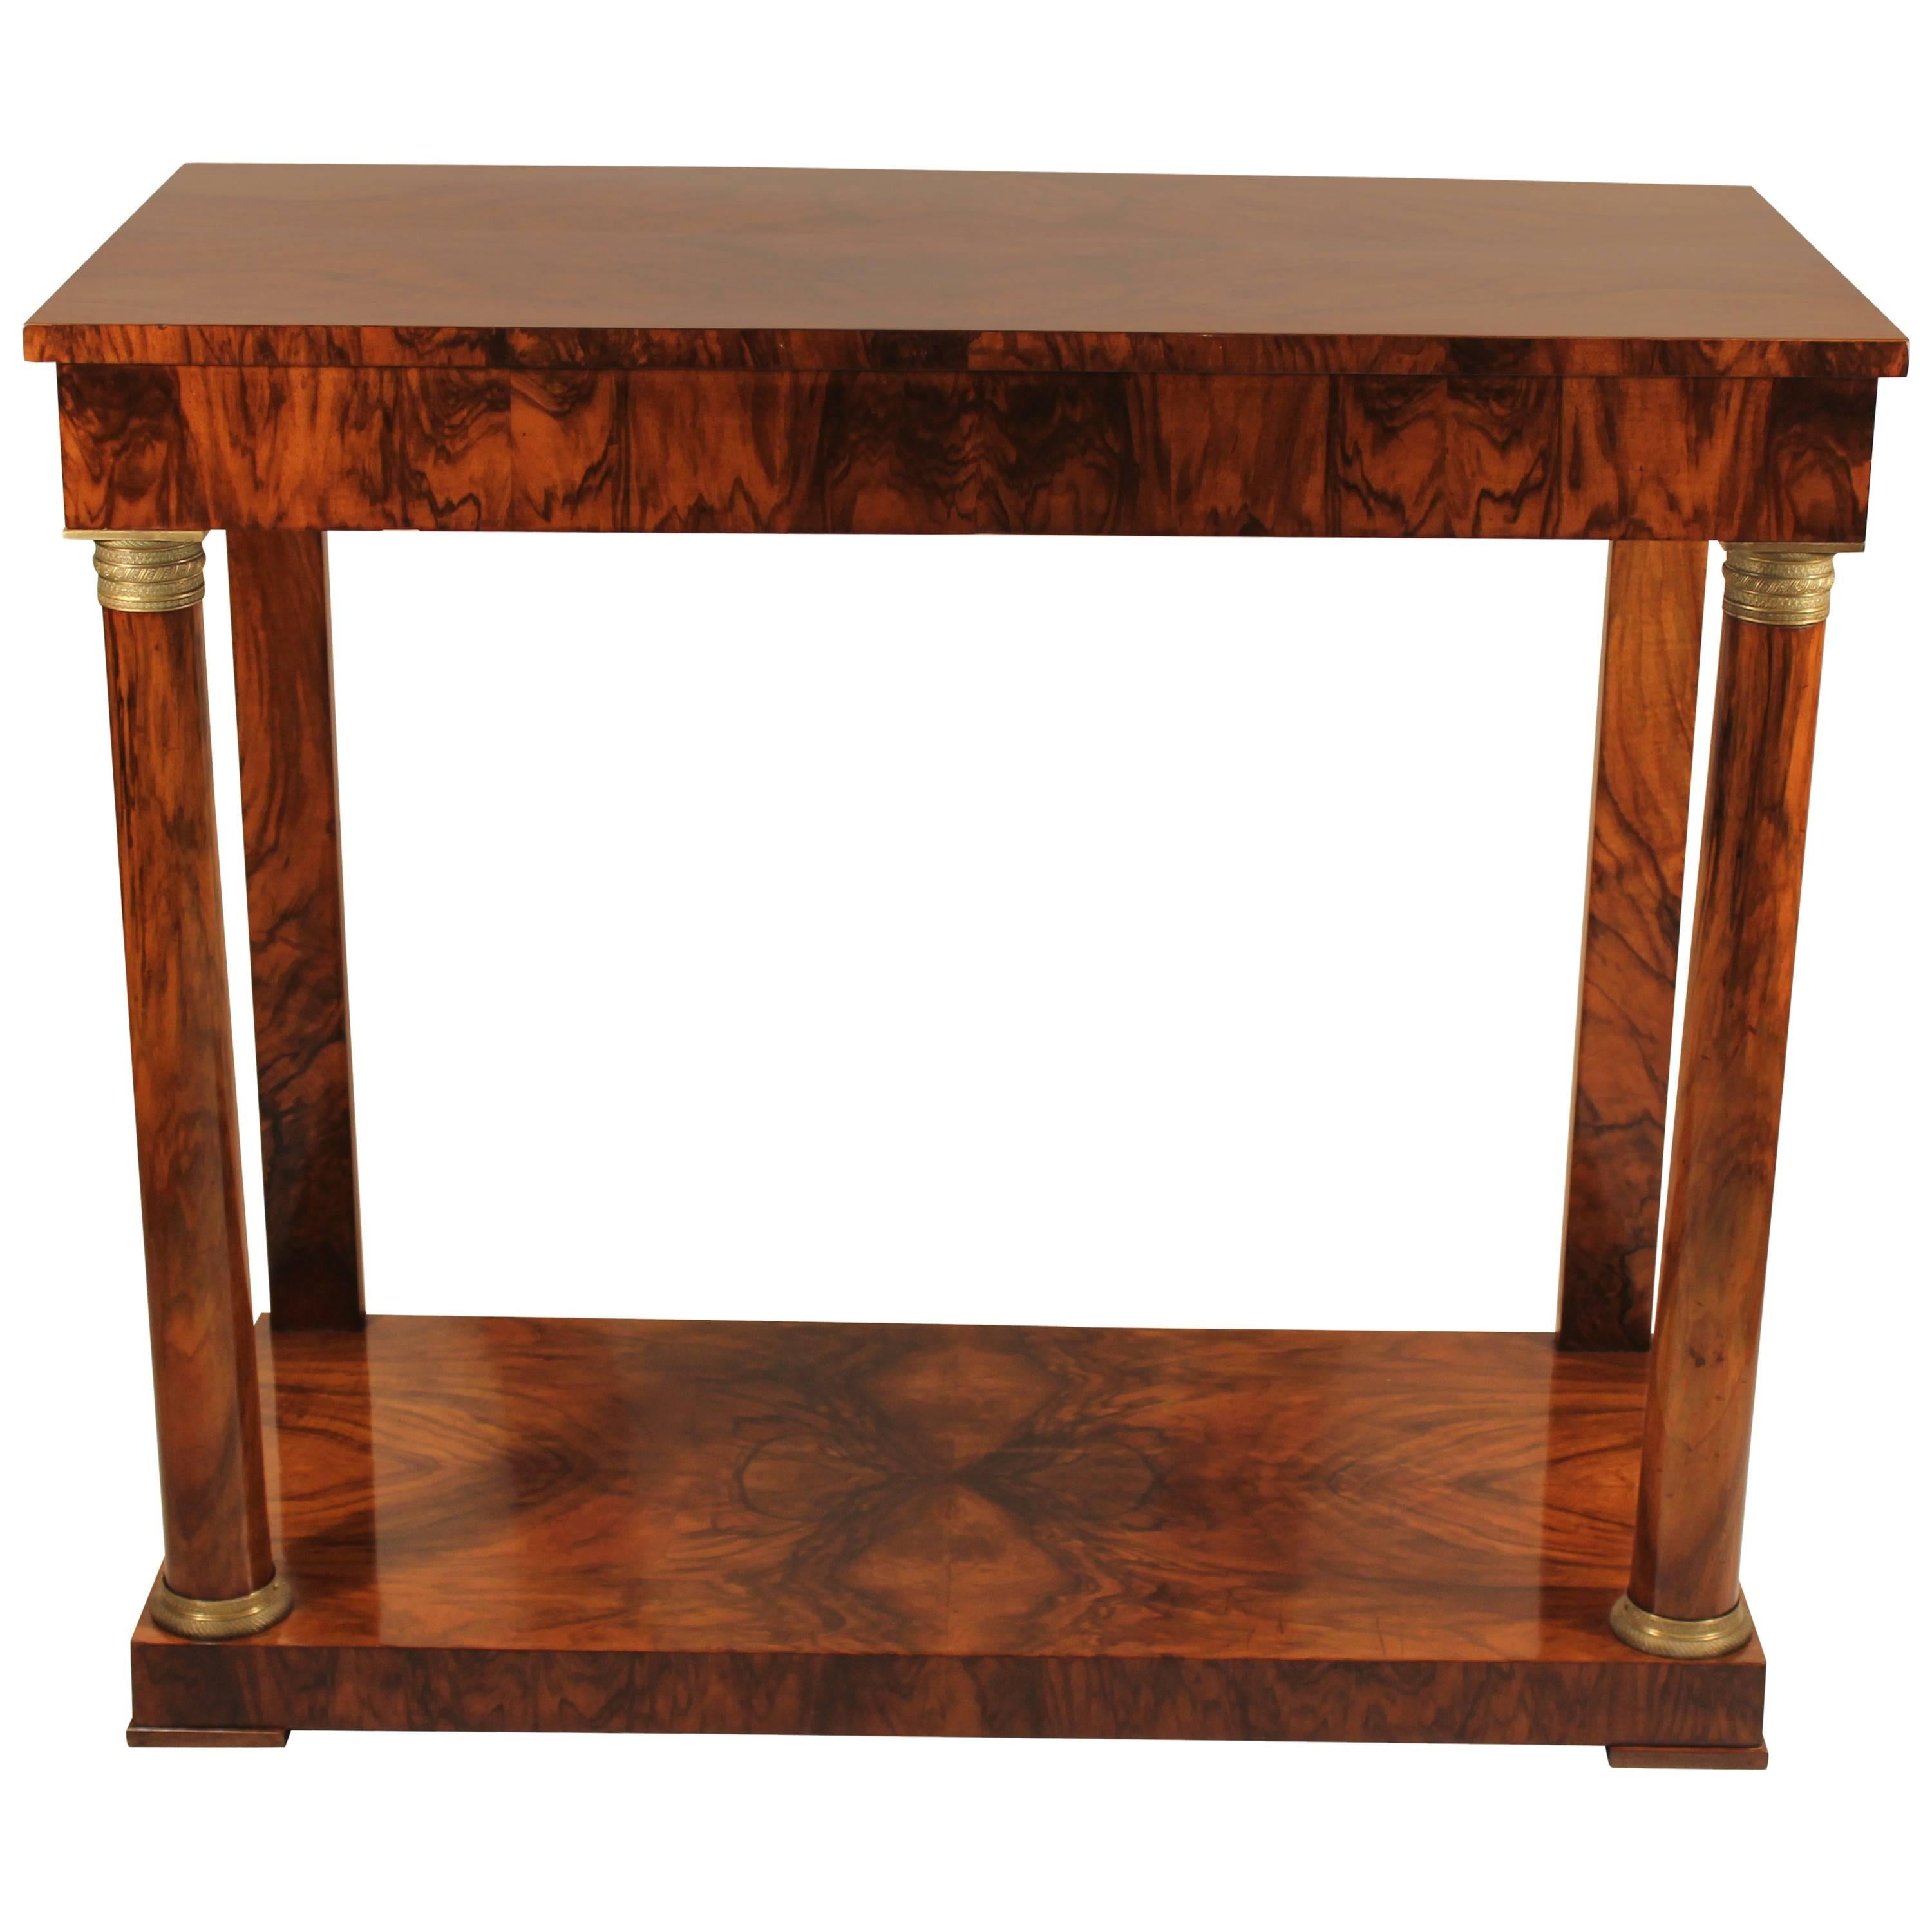 19th Century Empire Console Table, France 1810